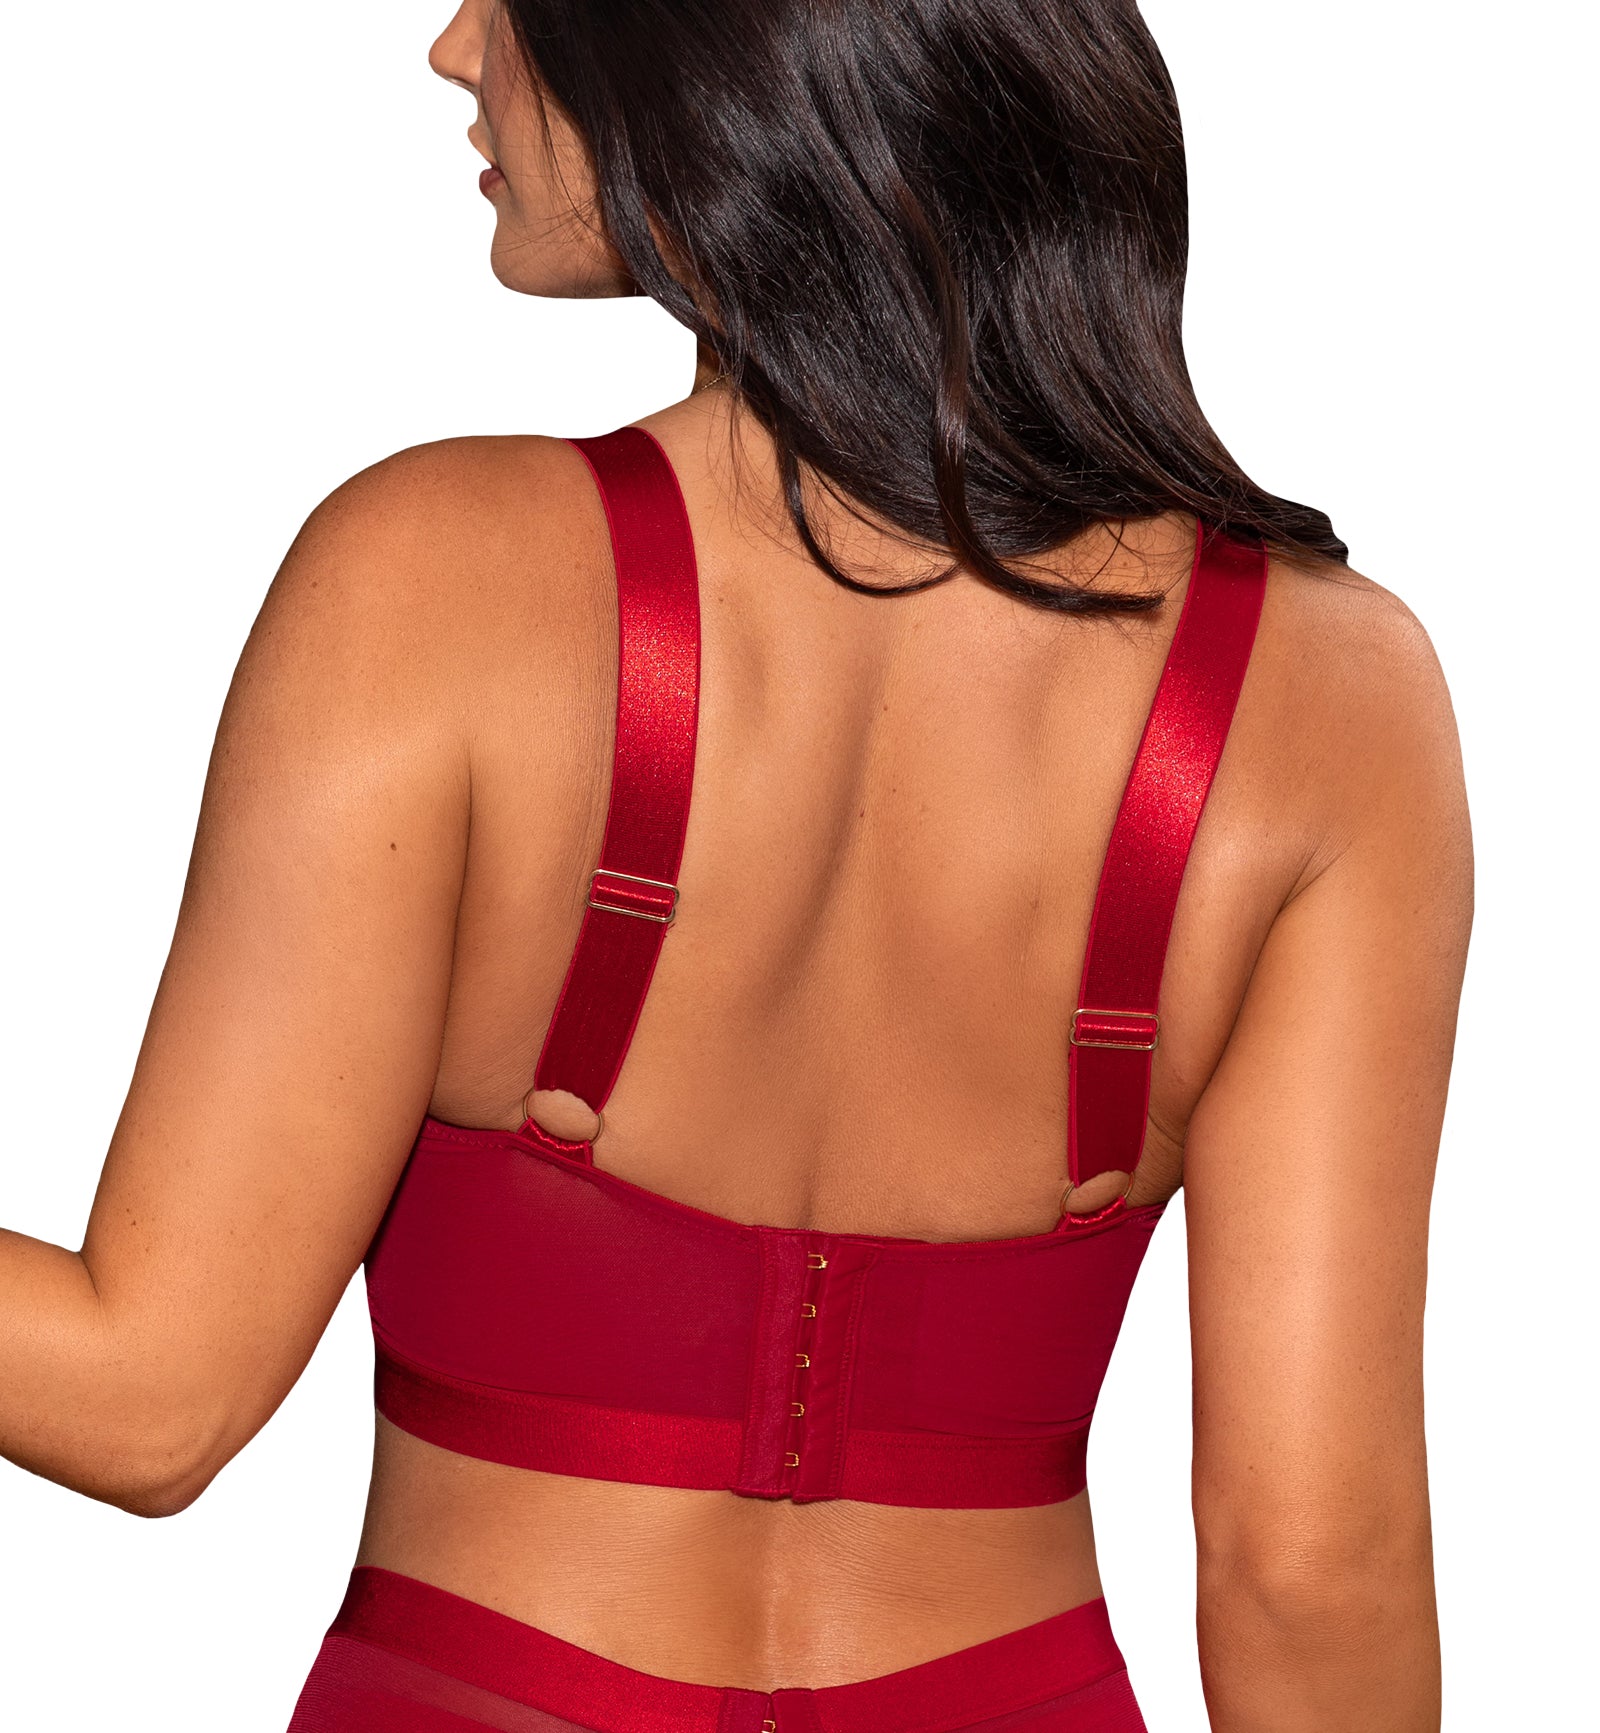 Pour Moi India Embroidery Underwire Bustier (20339),32D,Red - Red,32D